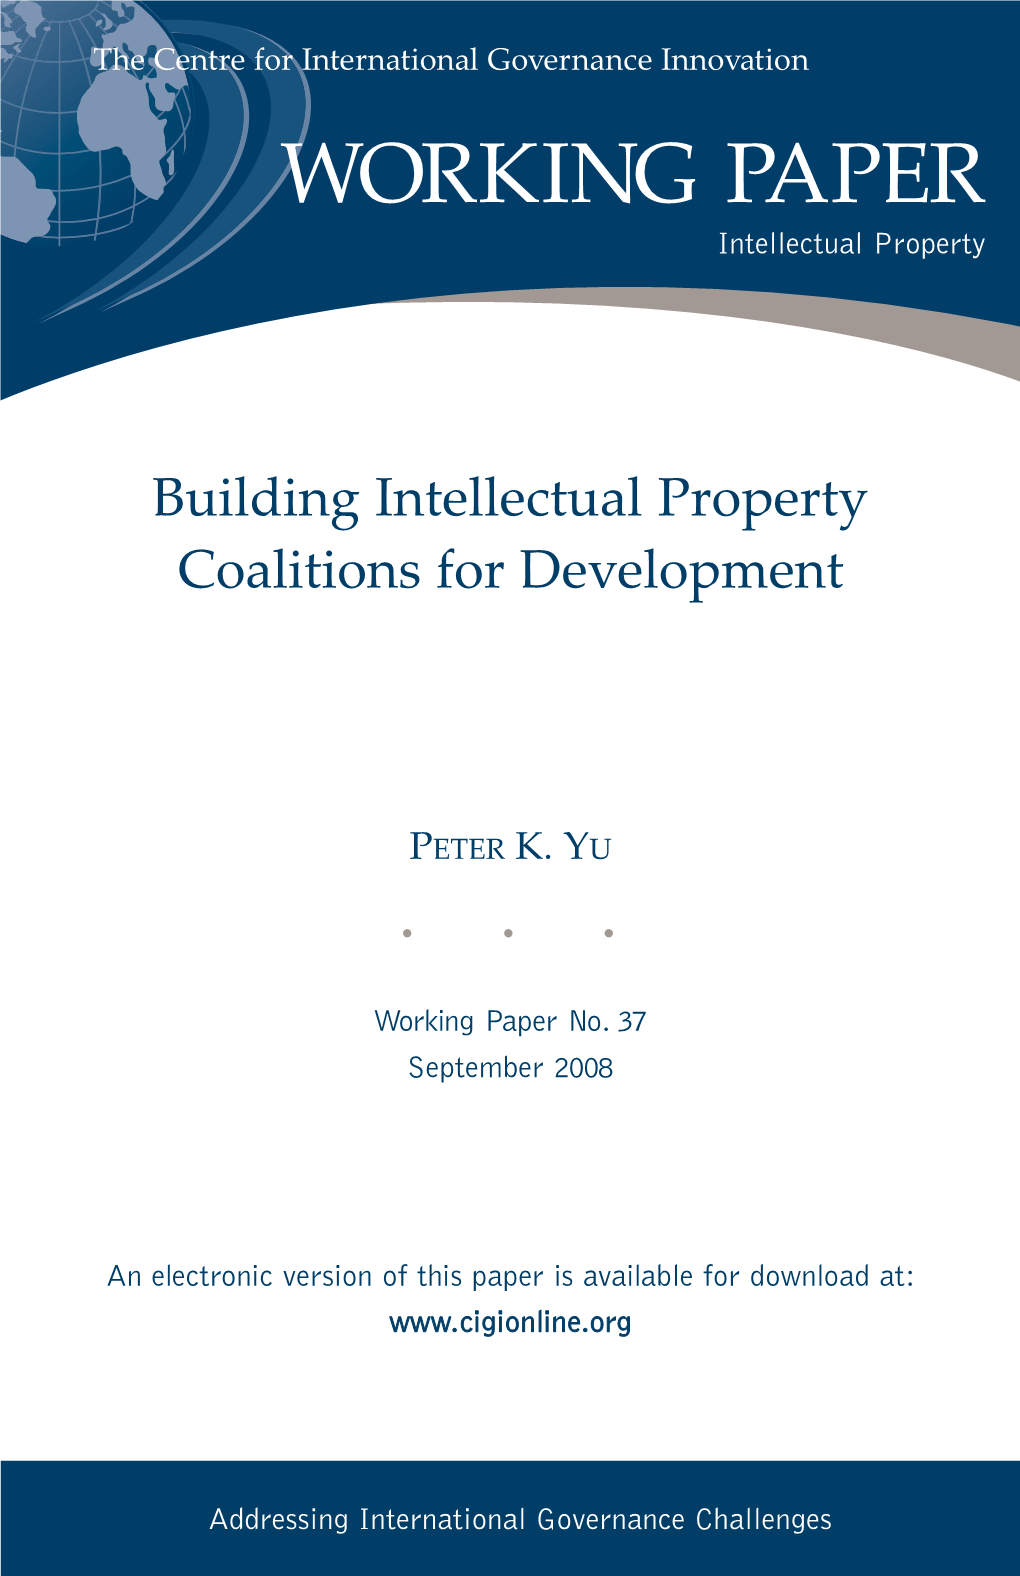 Building Intellectual Property Coalitions for Development